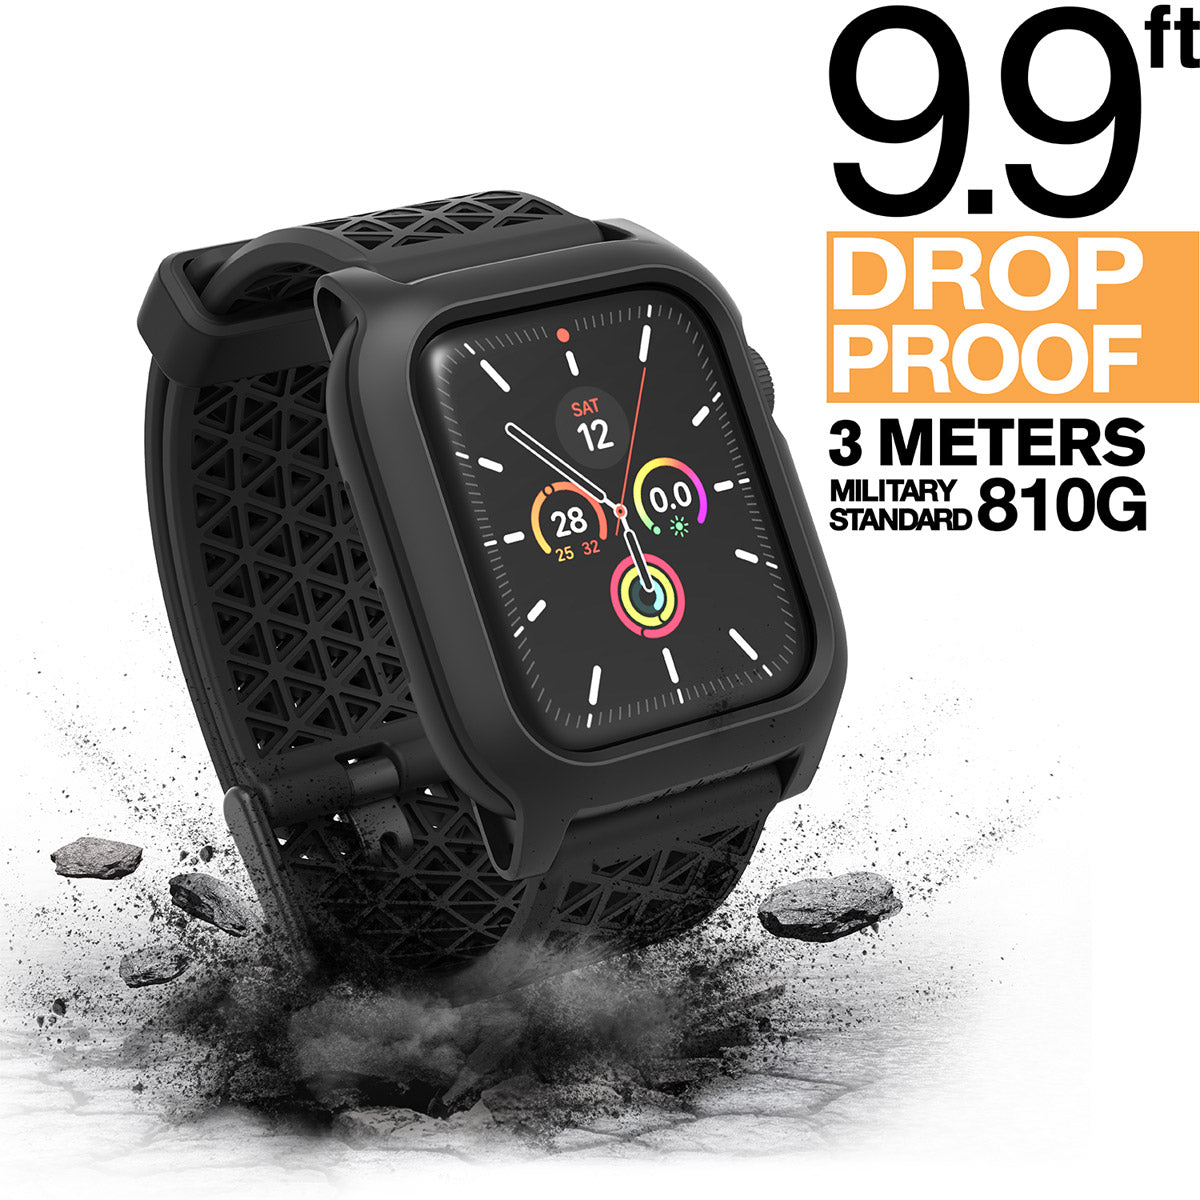 catalyst apple watch series 6 5 4 se gen 21 44mm 40mm impact protection case sport band stealth black showing an apple watch with a catalyst case and a cracked floor text reads 9.9ft drop proof 3 meters military standard 810g